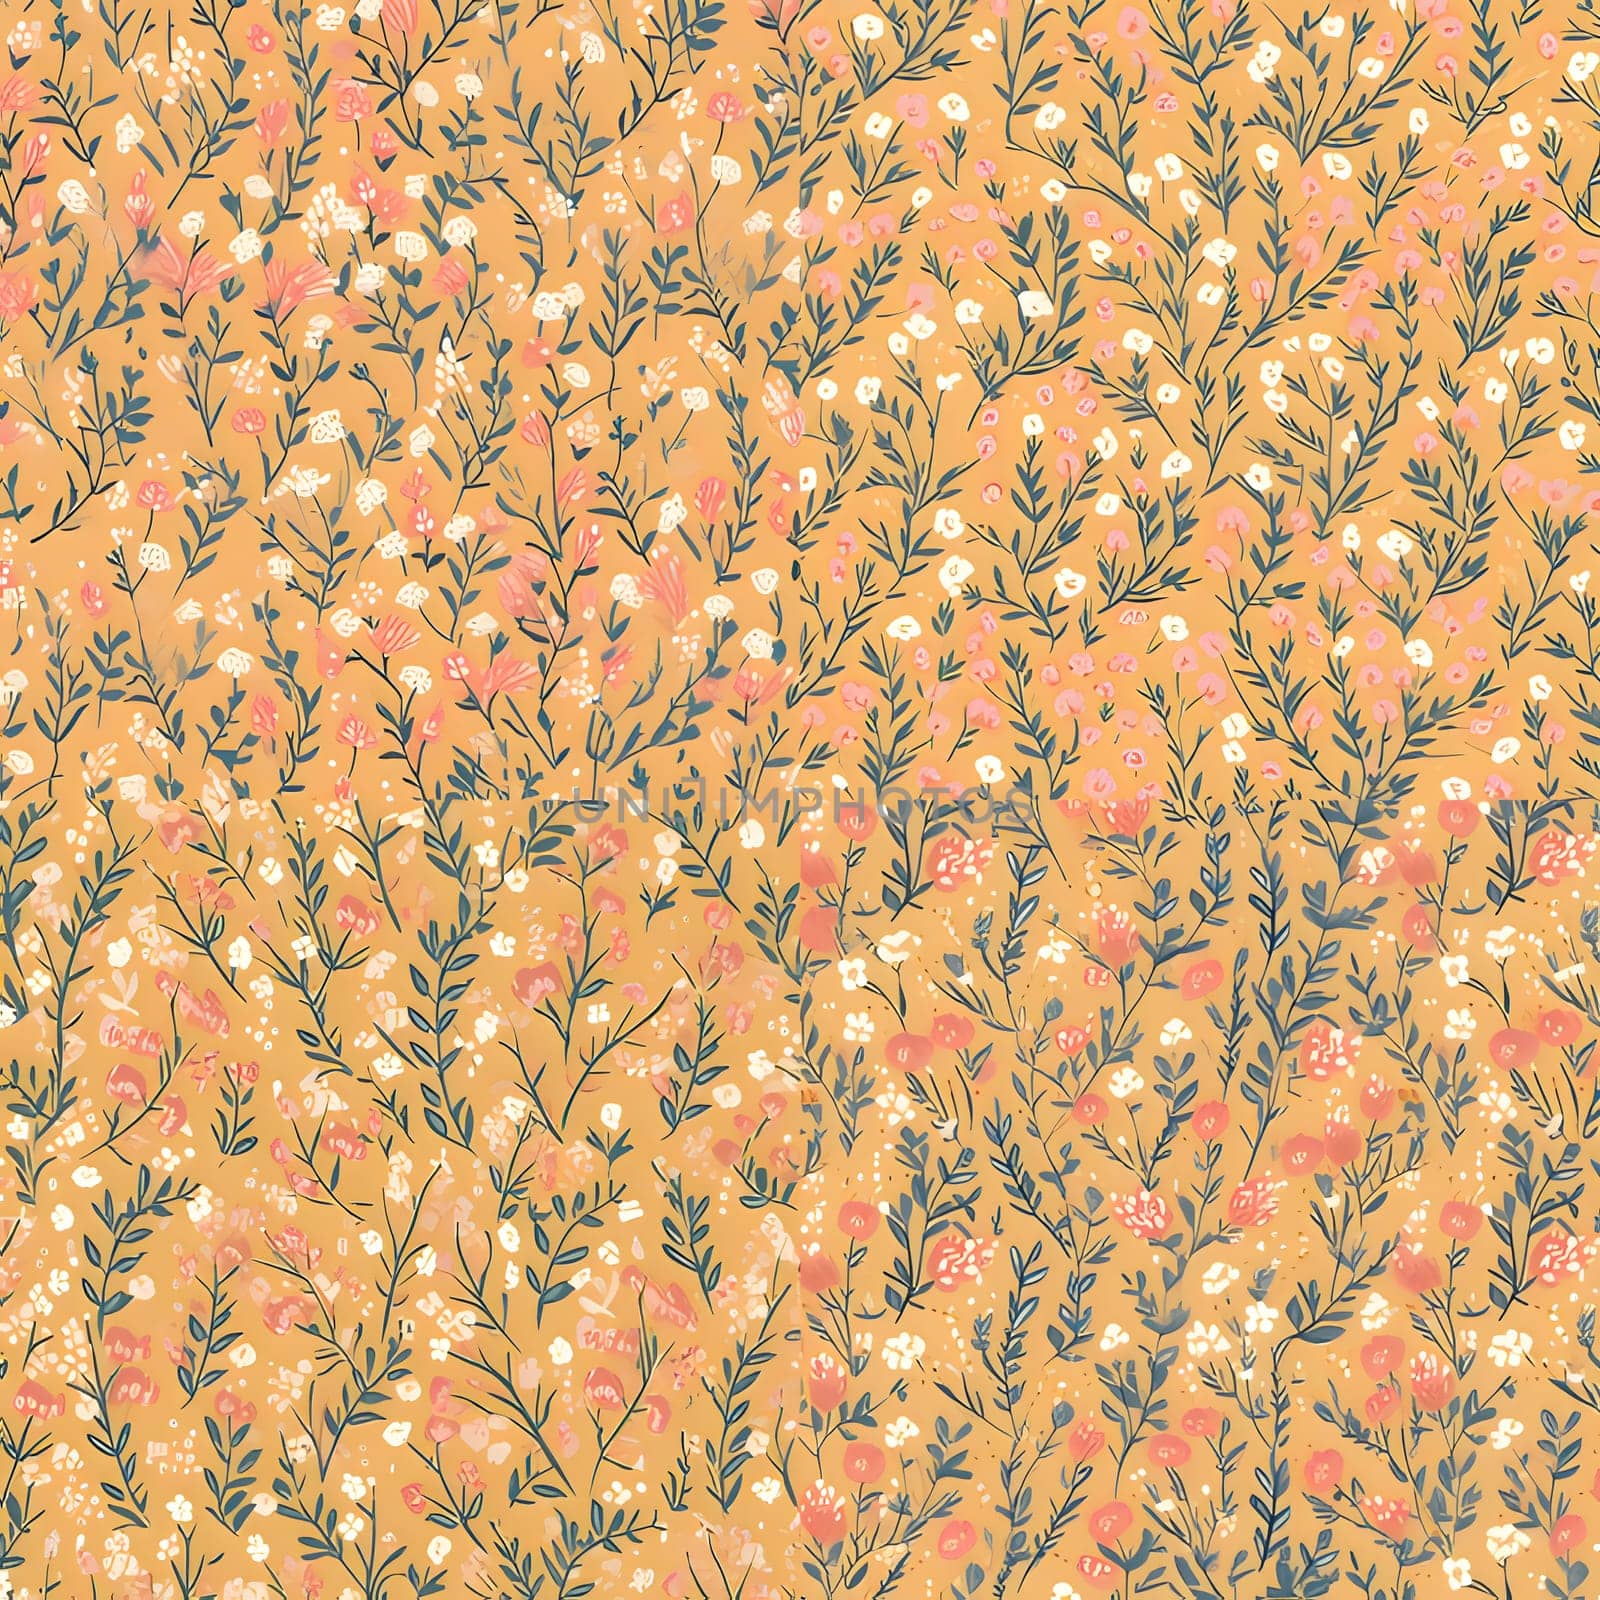 Seamless floral pattern with flowers and leaves. Vector illustration. by ThemesS